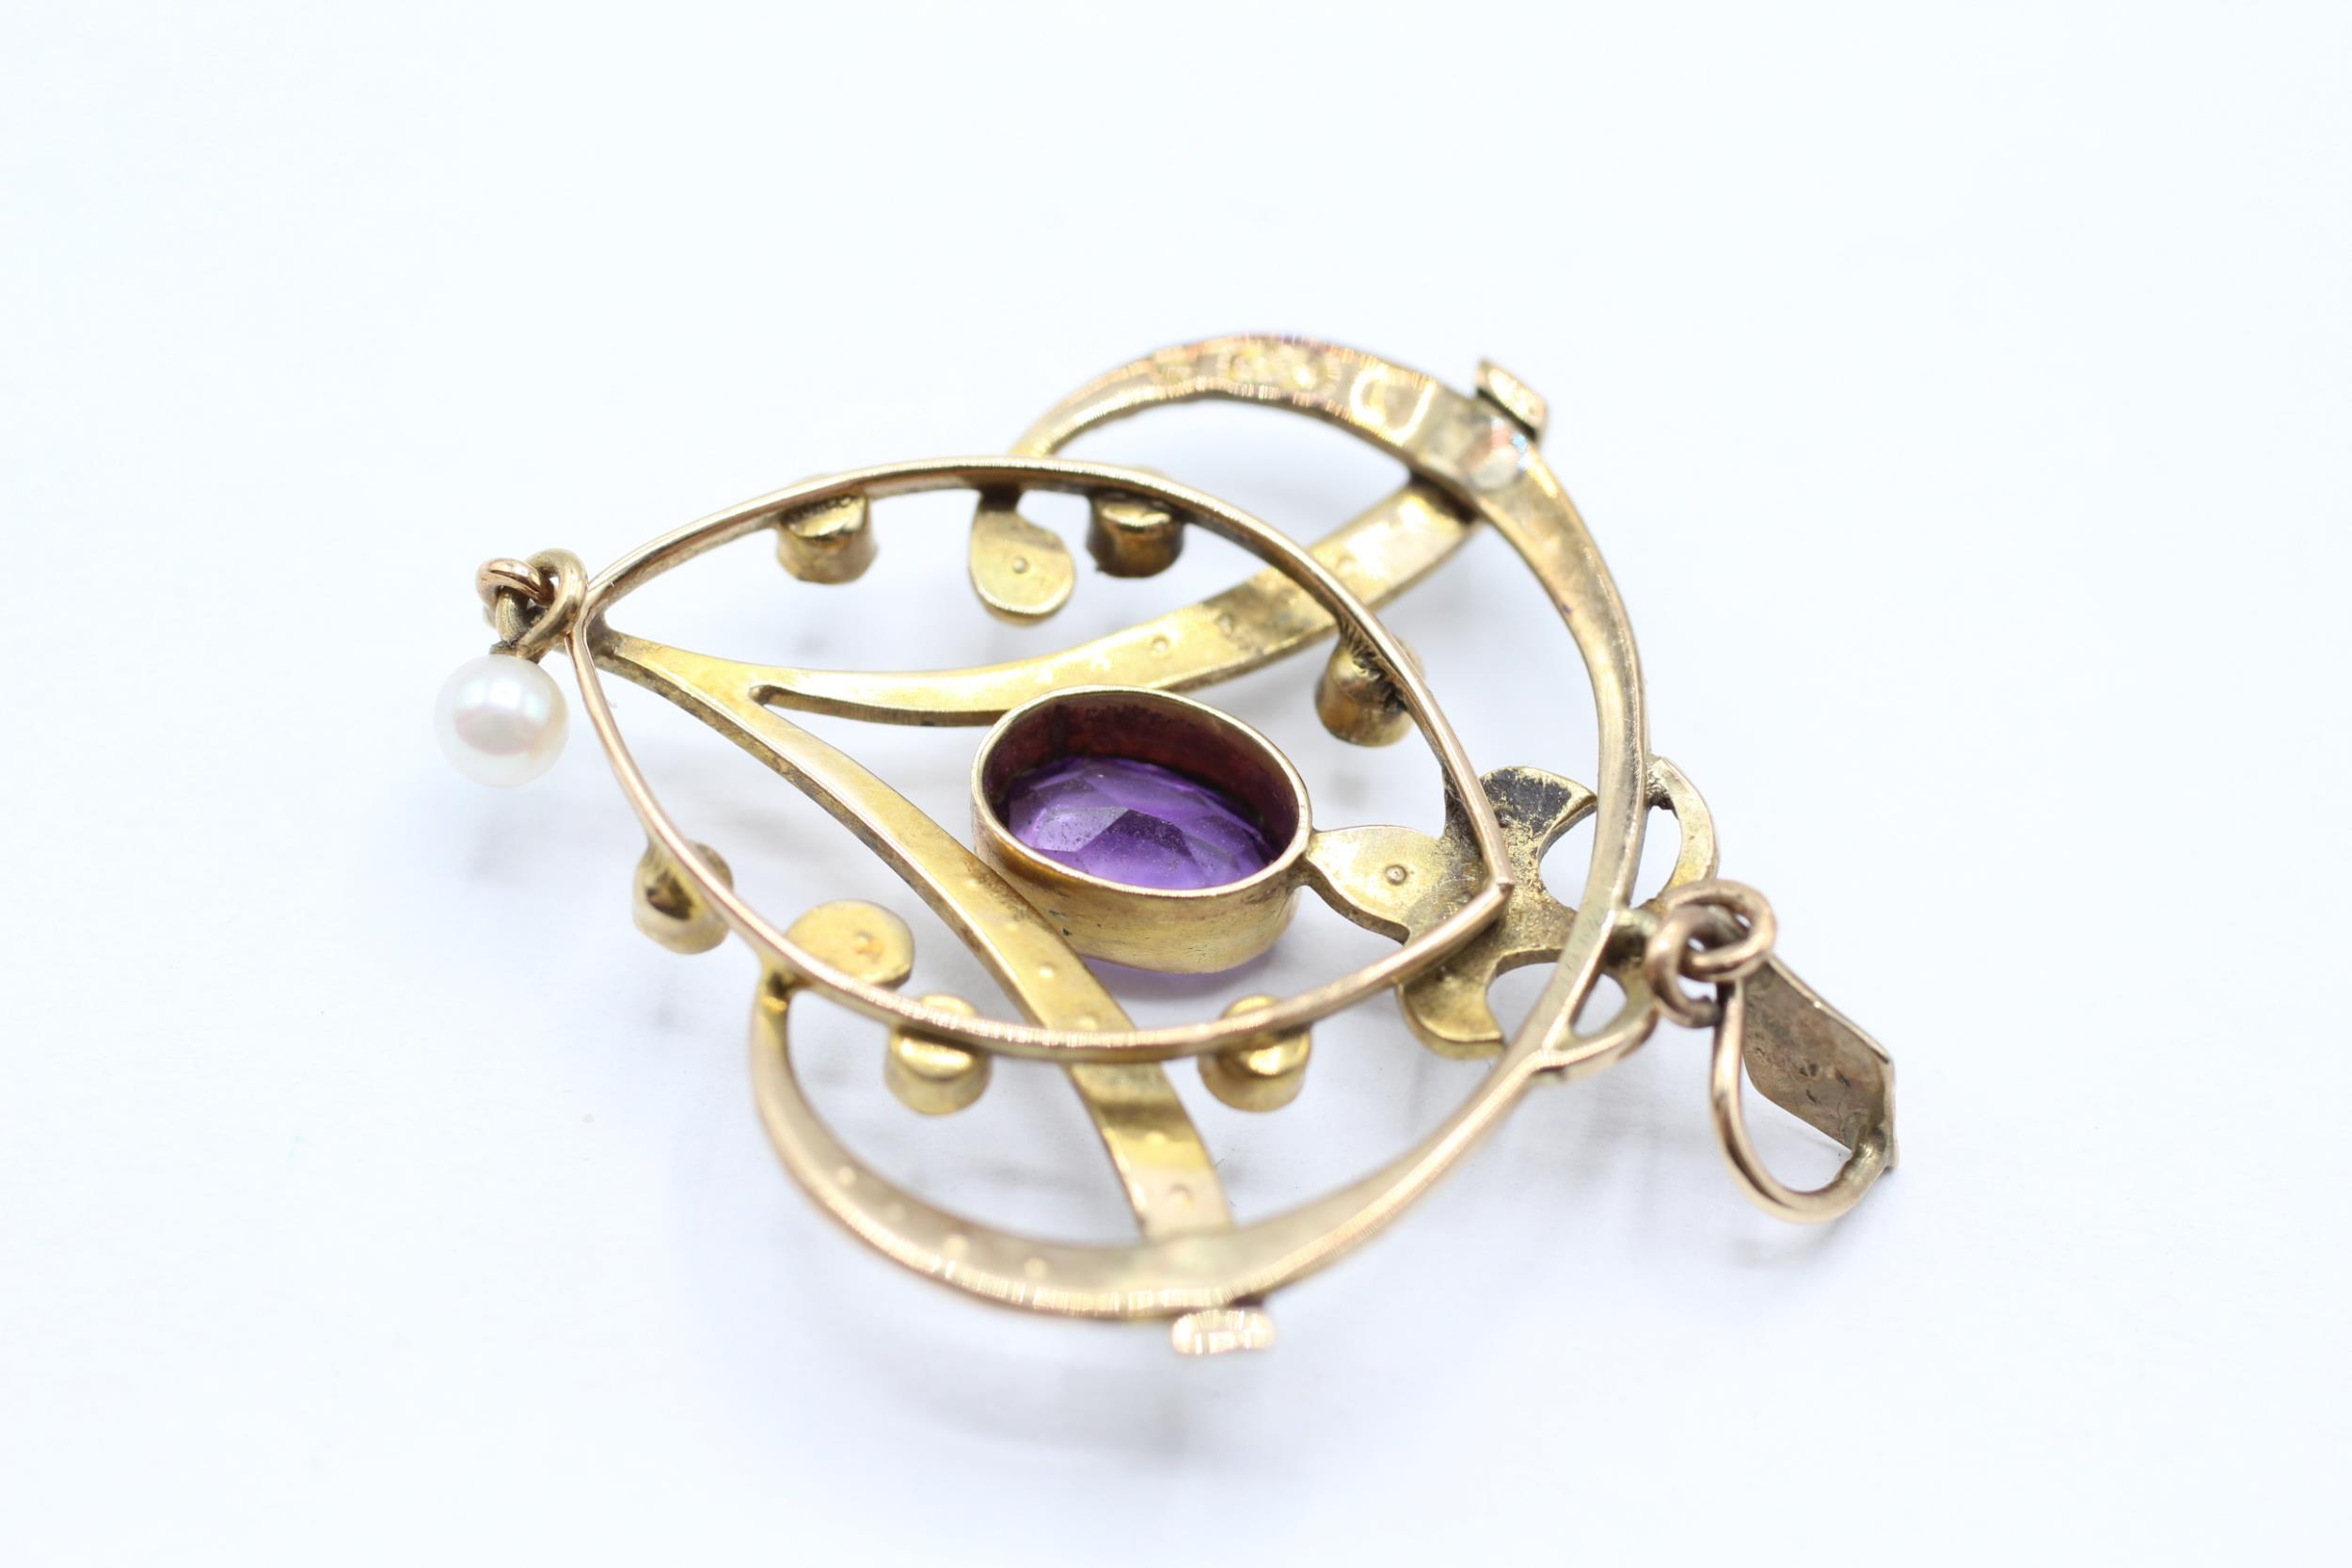 9ct gold Edwardian amethyst & seed pearl pendant with a drop cultured pearl 3.3 g - Image 5 of 5